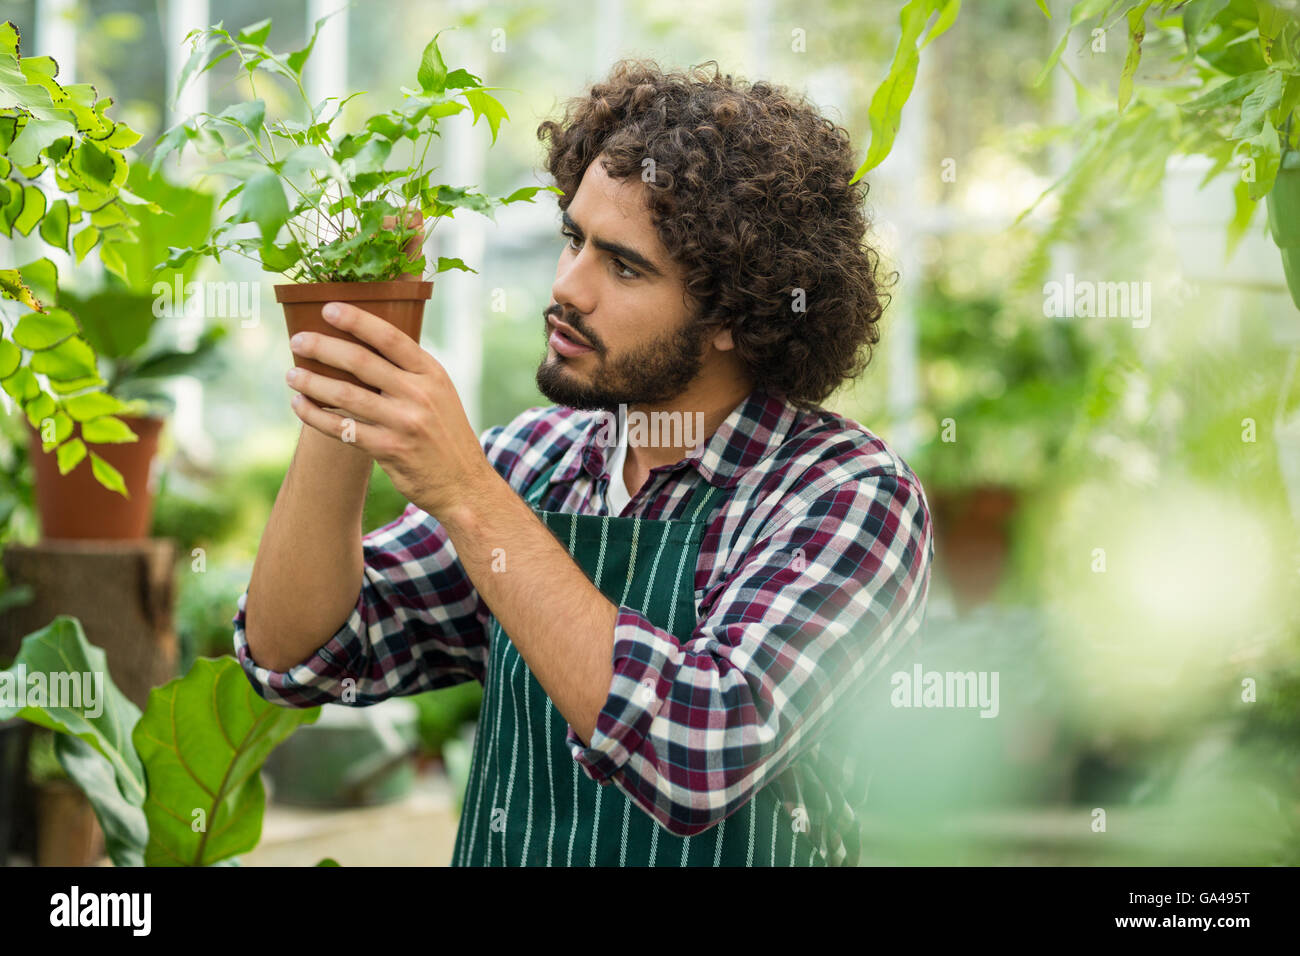 Young male gardener examining potted plant Stock Photo